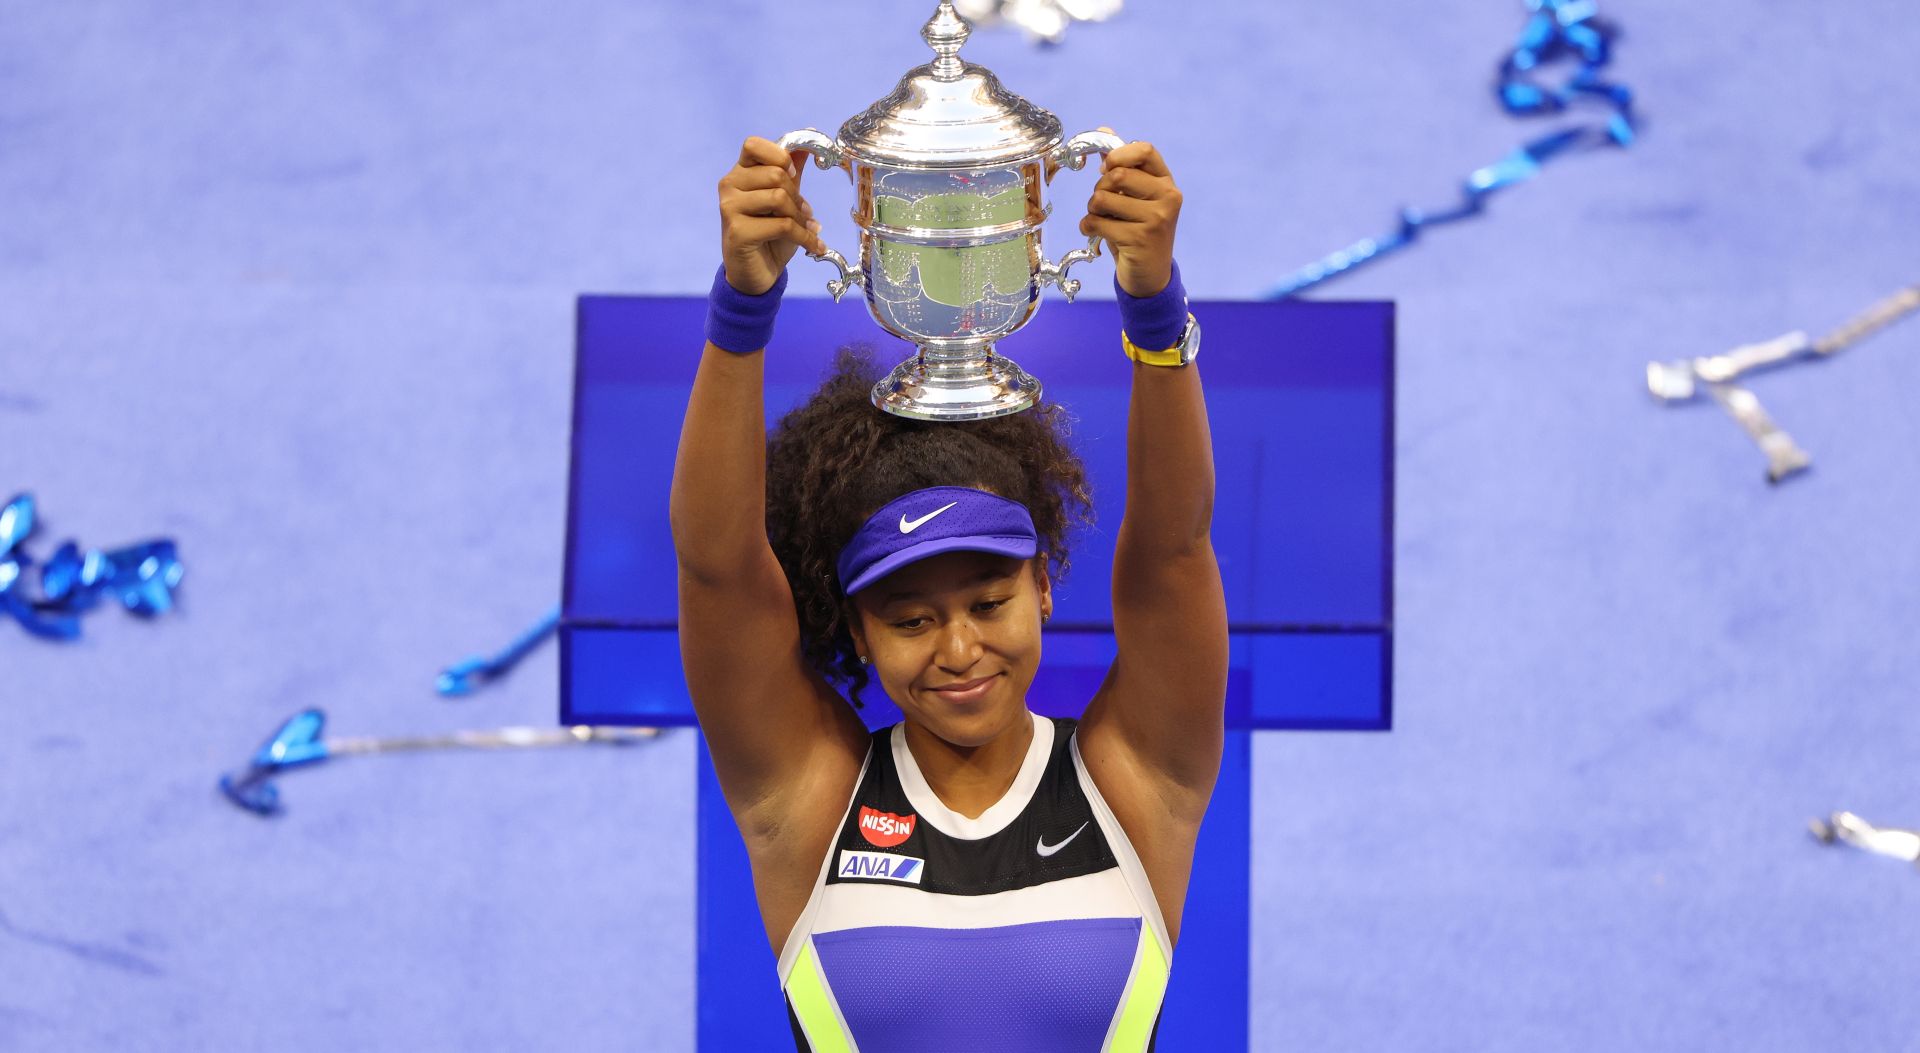 epaselect epa08665467 Naomi Osaka of Japan celebrates with the Championship Trophy after defeating Victoria Azarenka to win the Women's Final match on the thirteenth day of the US Open Tennis Championships the USTA National Tennis Center in Flushing Meadows, New York, USA, 12 September 2020. Due to the coronavirus pandemic, the US Open is being played without fans and runs from 31 August through 13 September.  EPA/JUSTIN LANE